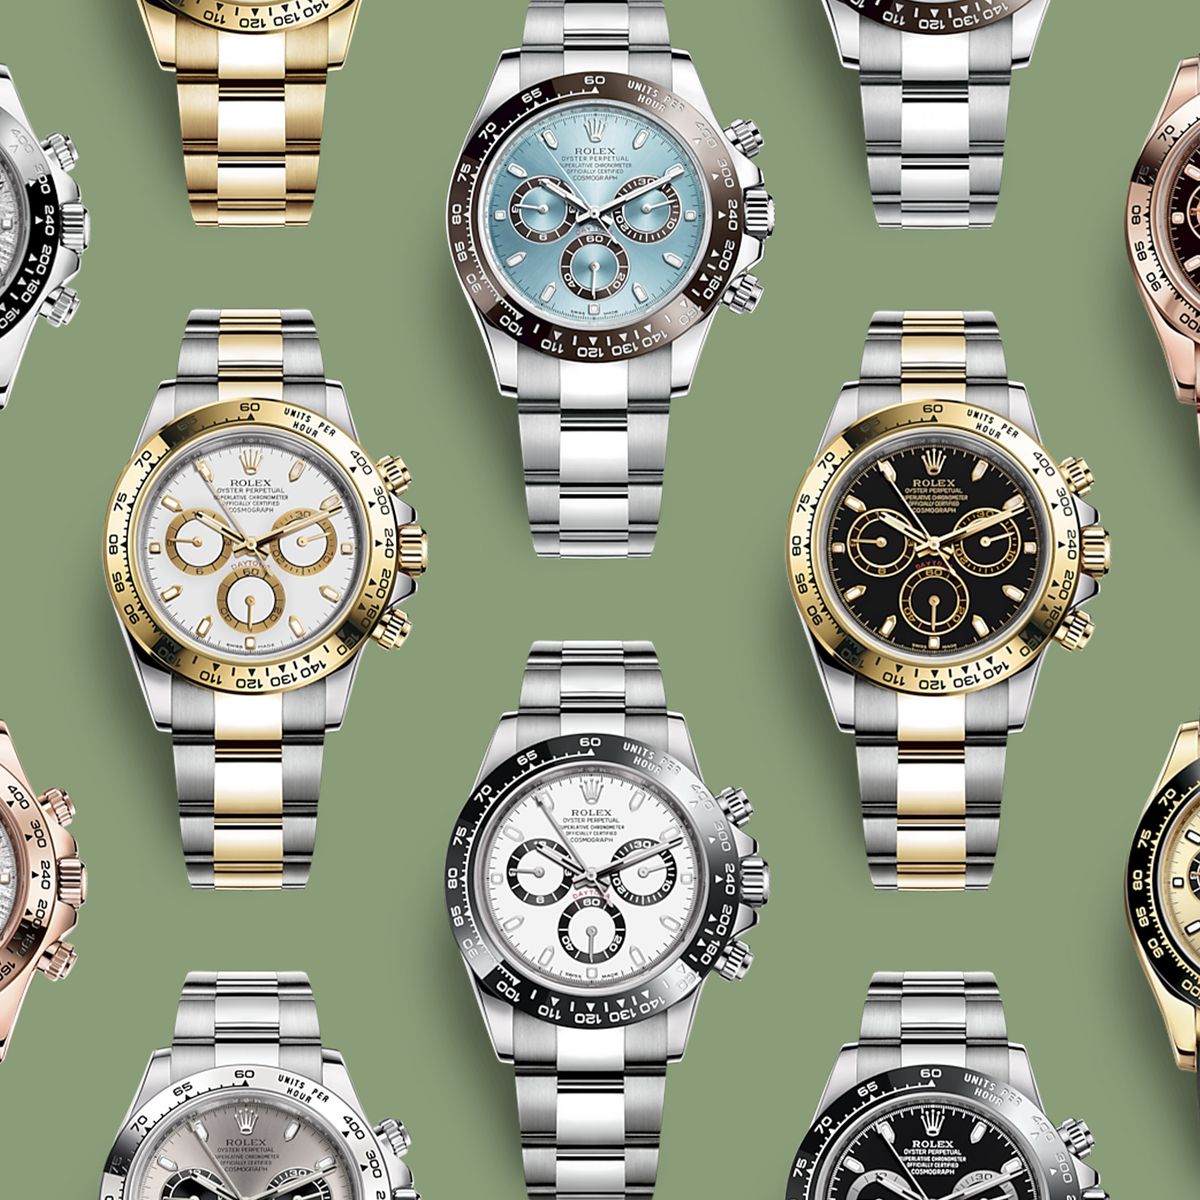 The Rolex Daytona: Everything You Need To Know